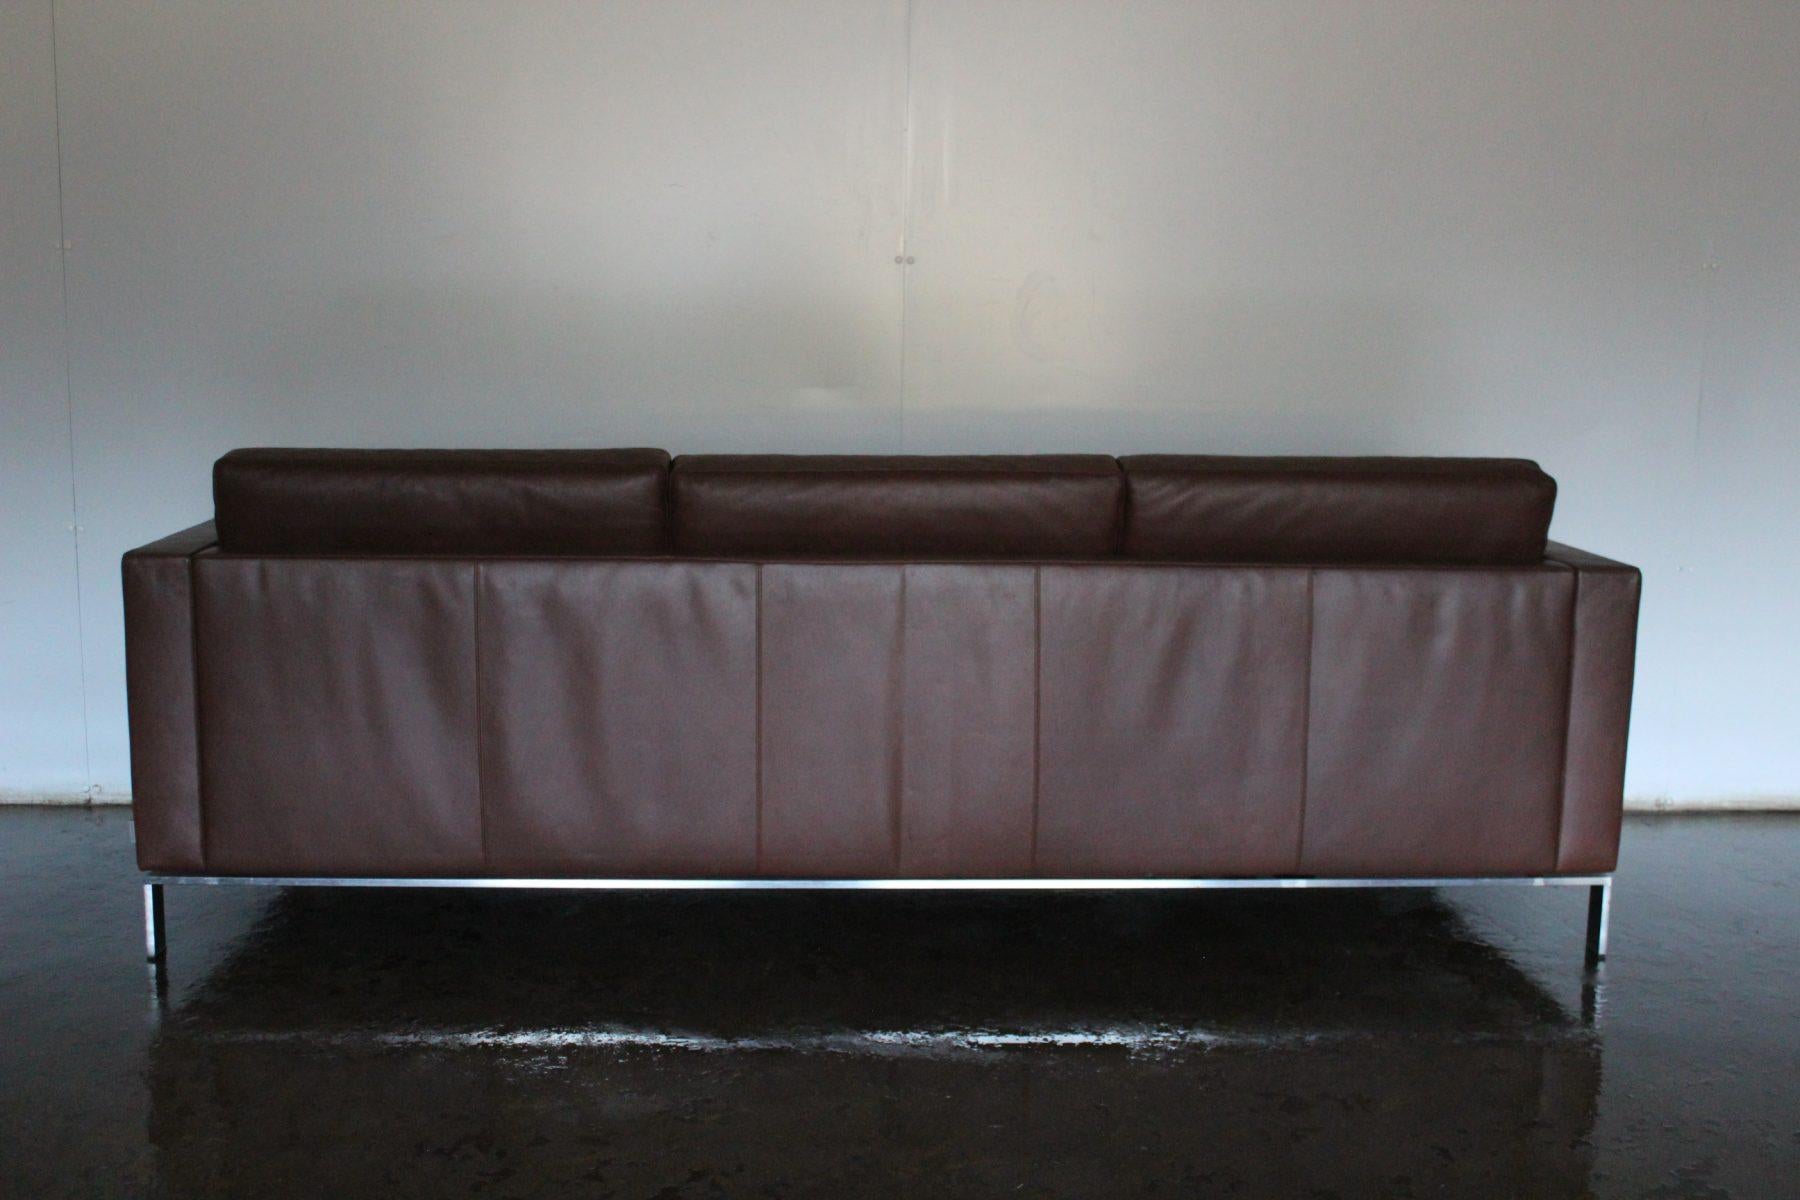 Walter Knoll “Foster 502.30” 3-Seat Sofa – In Dark Brown Leather For Sale 6